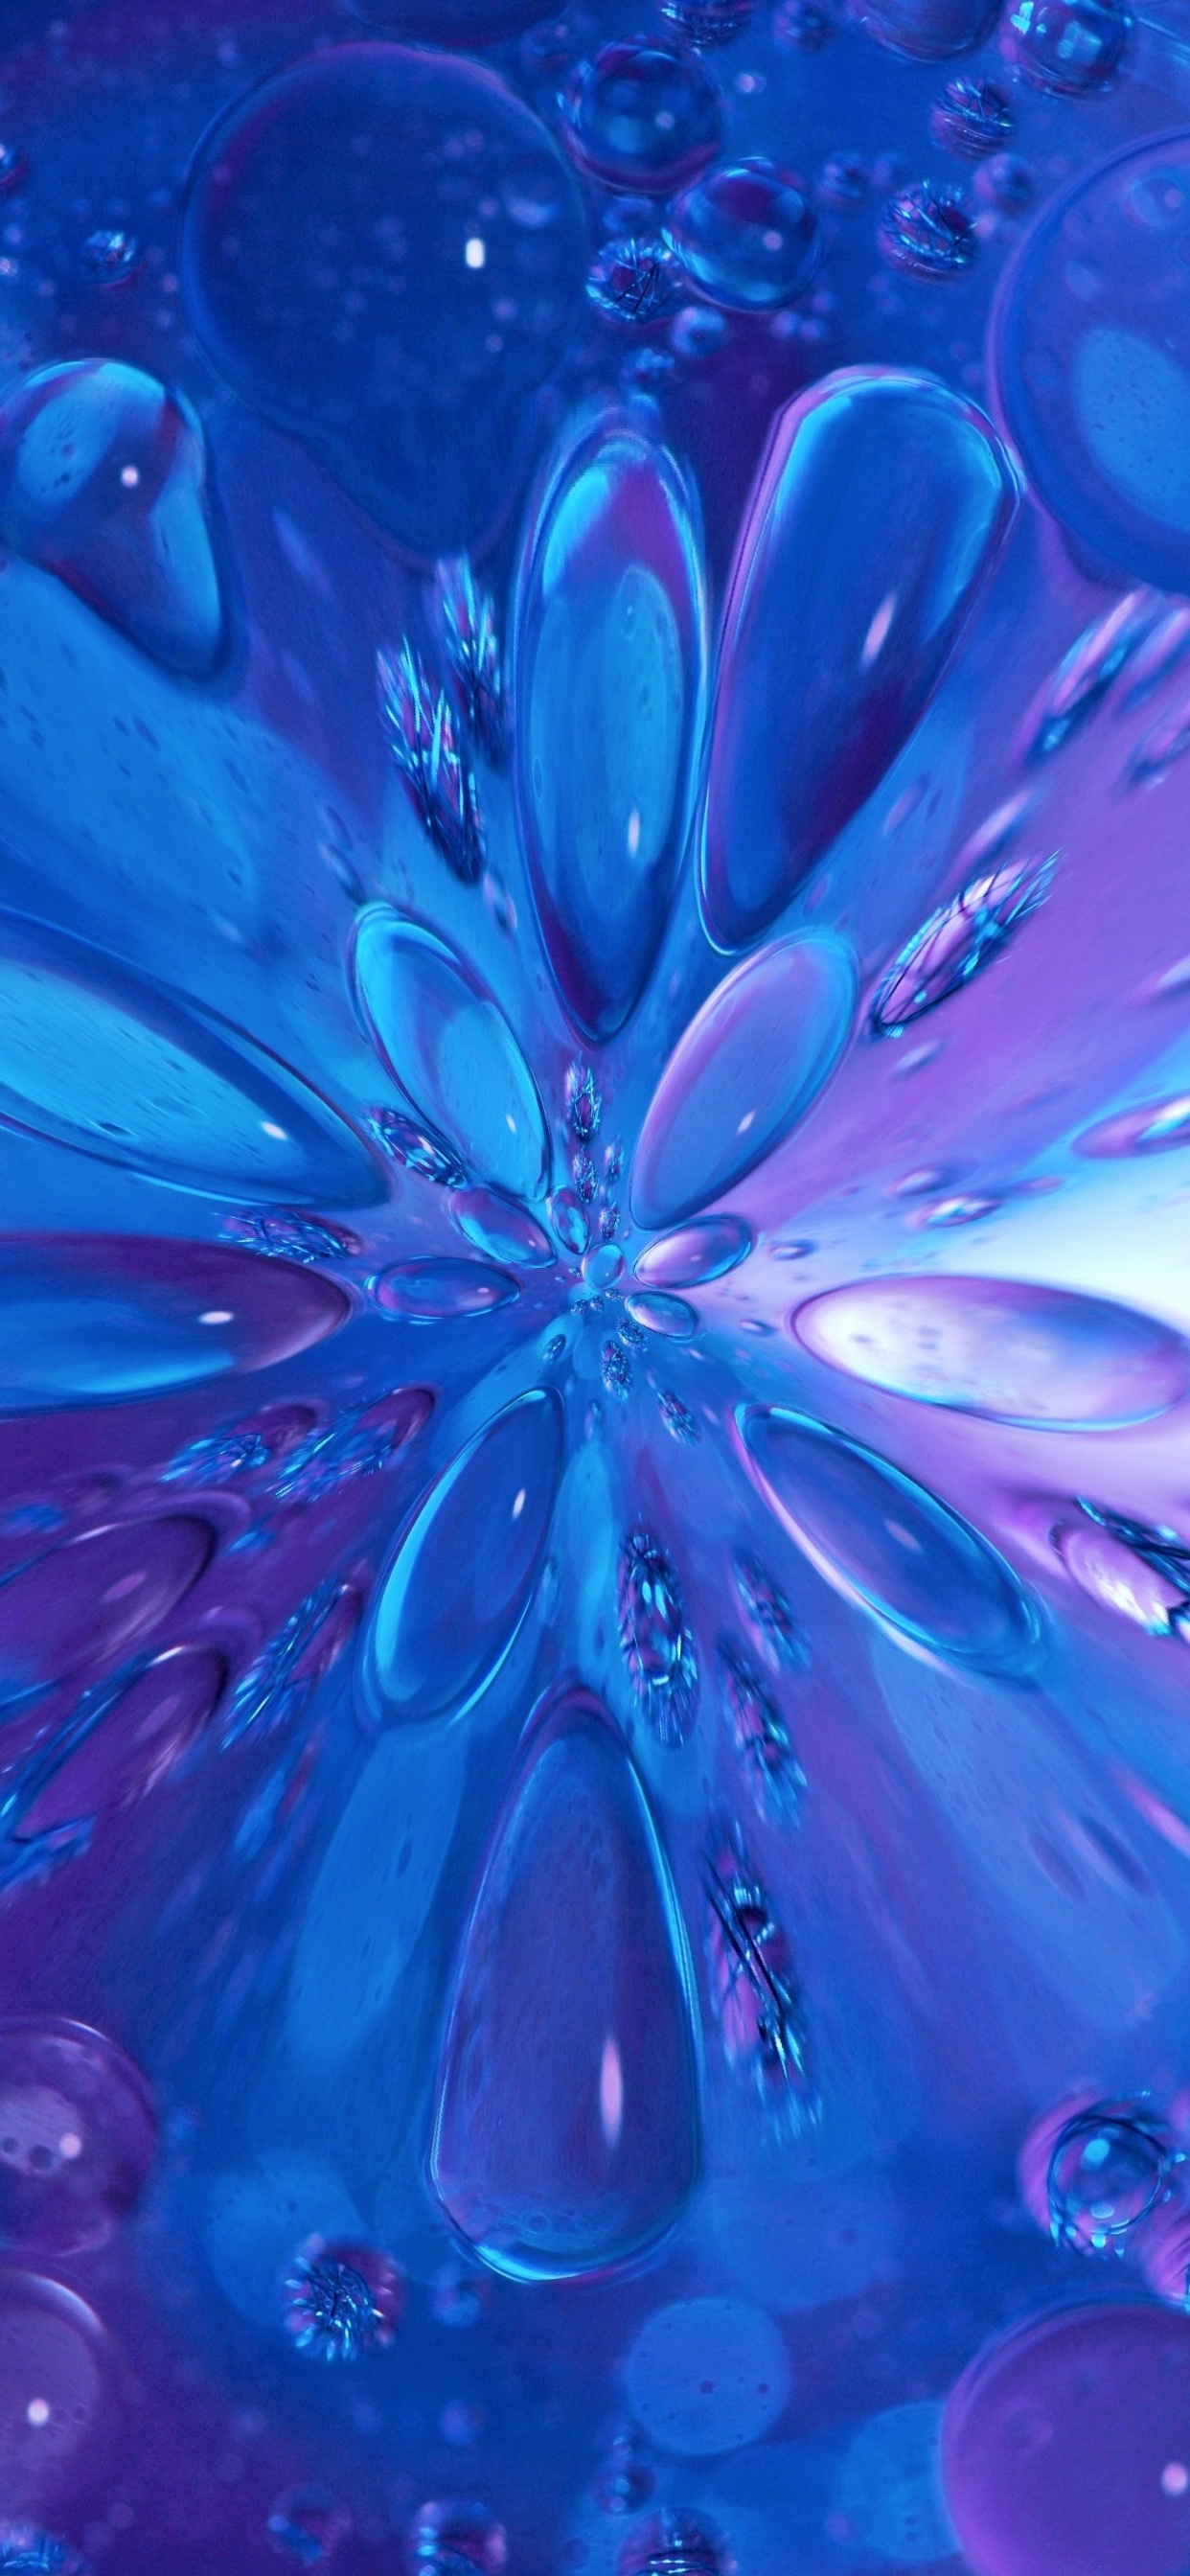 Water Droplets on Blue Glass. Wallpaper in 1242x2688 Resolution